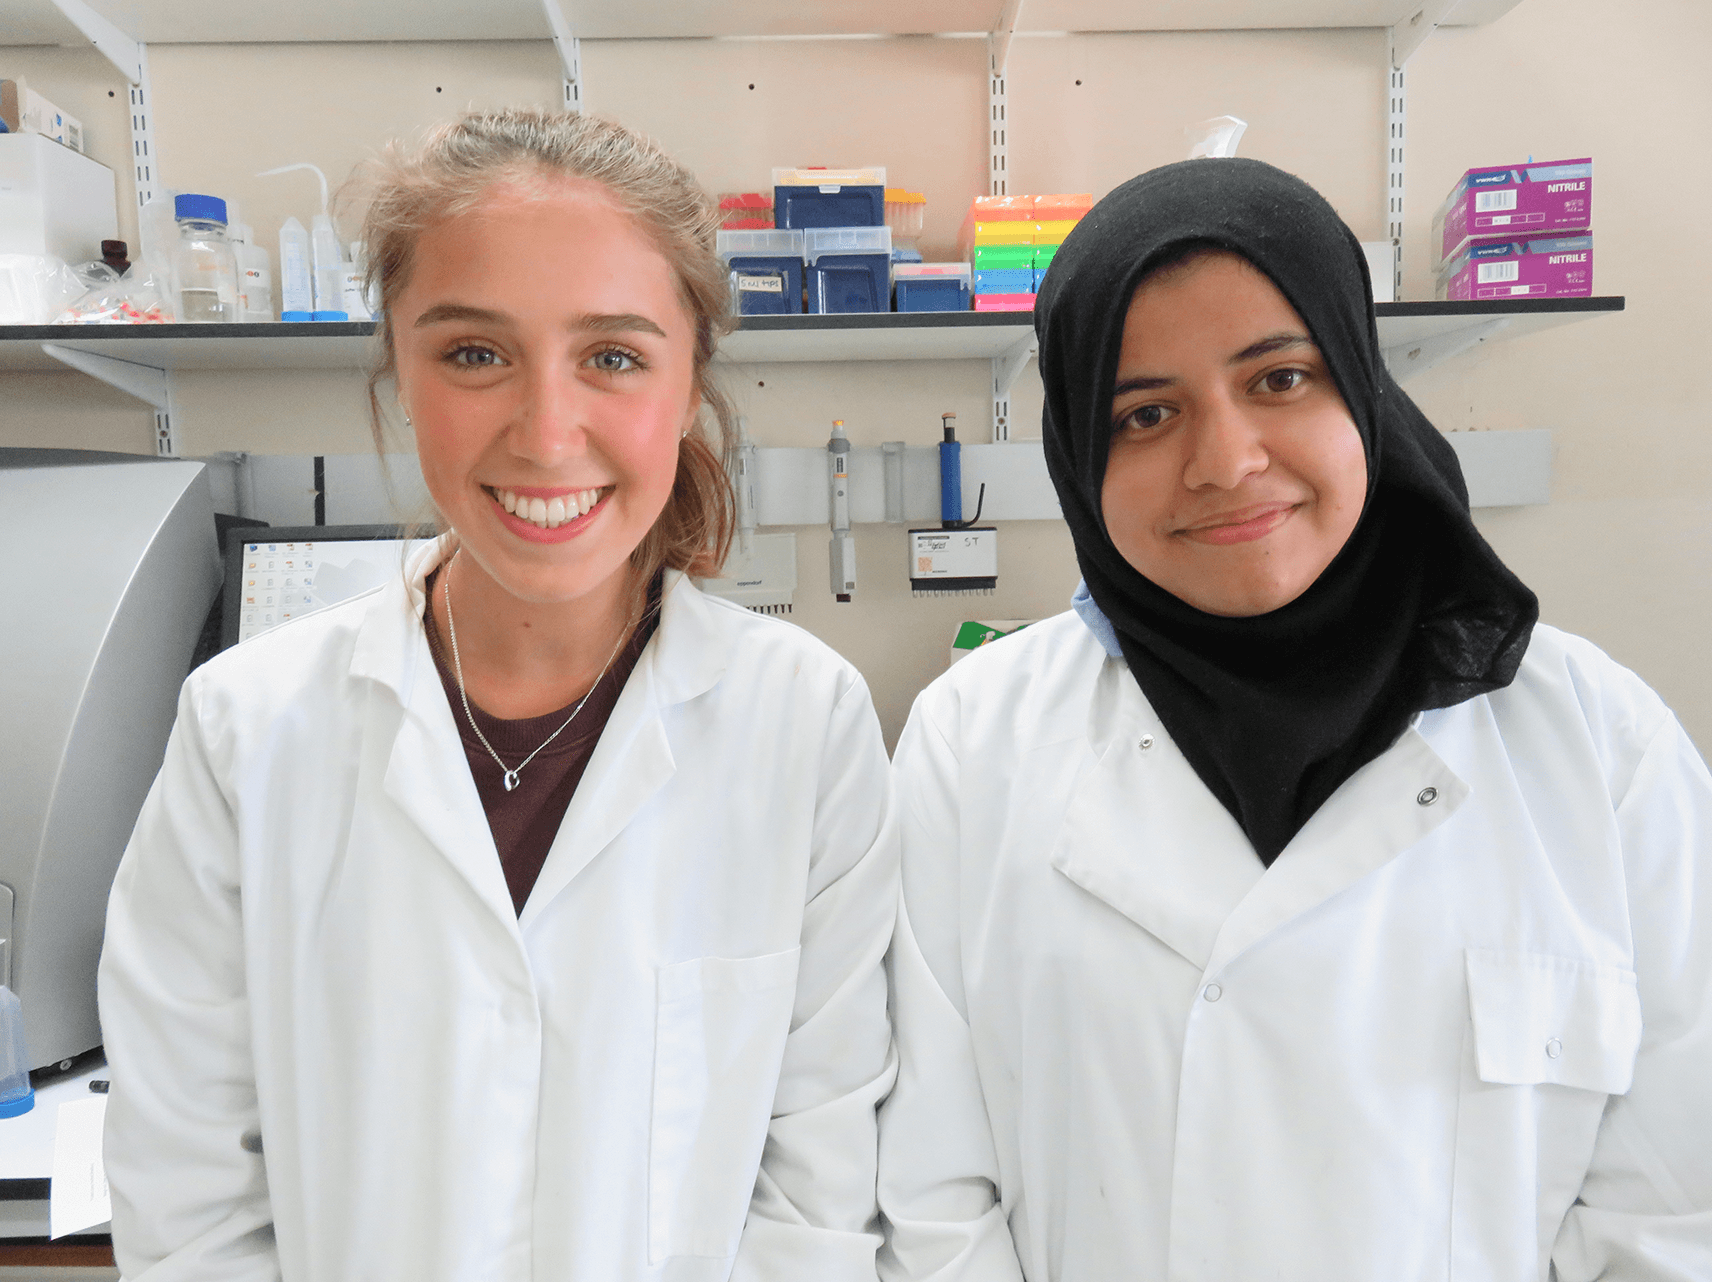 Two In2research students in lab coats